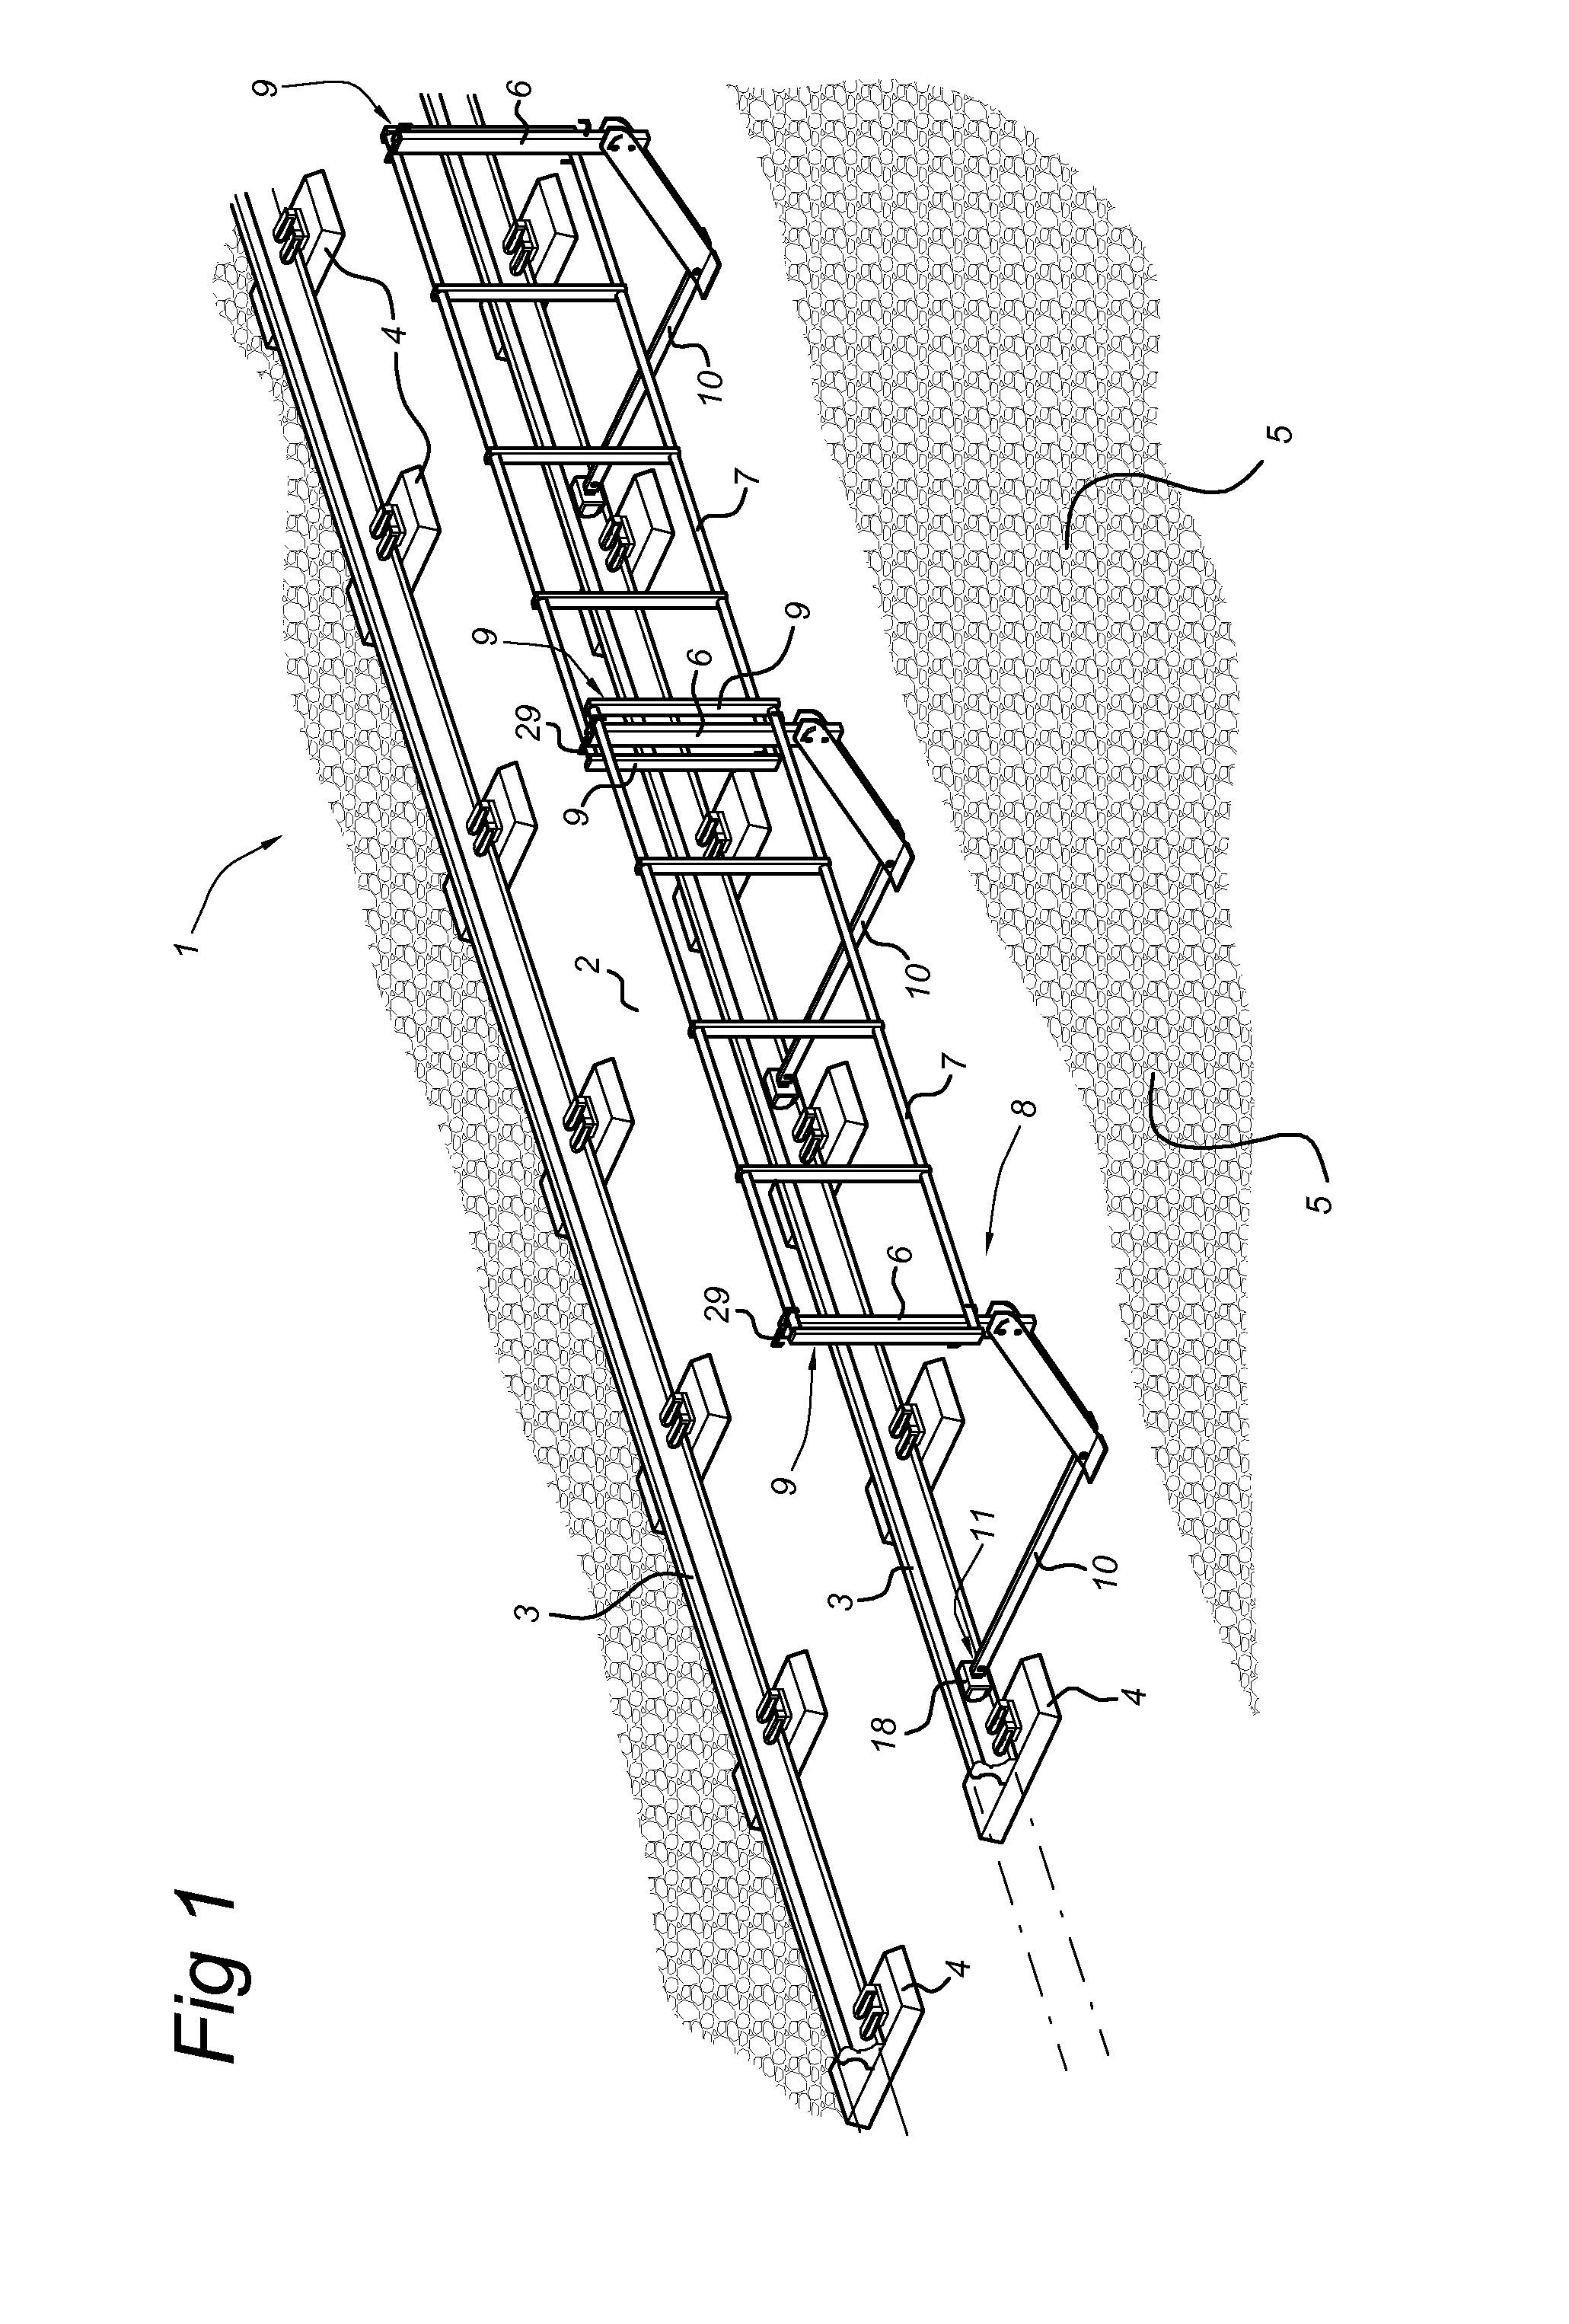 Safety structure for a railway line